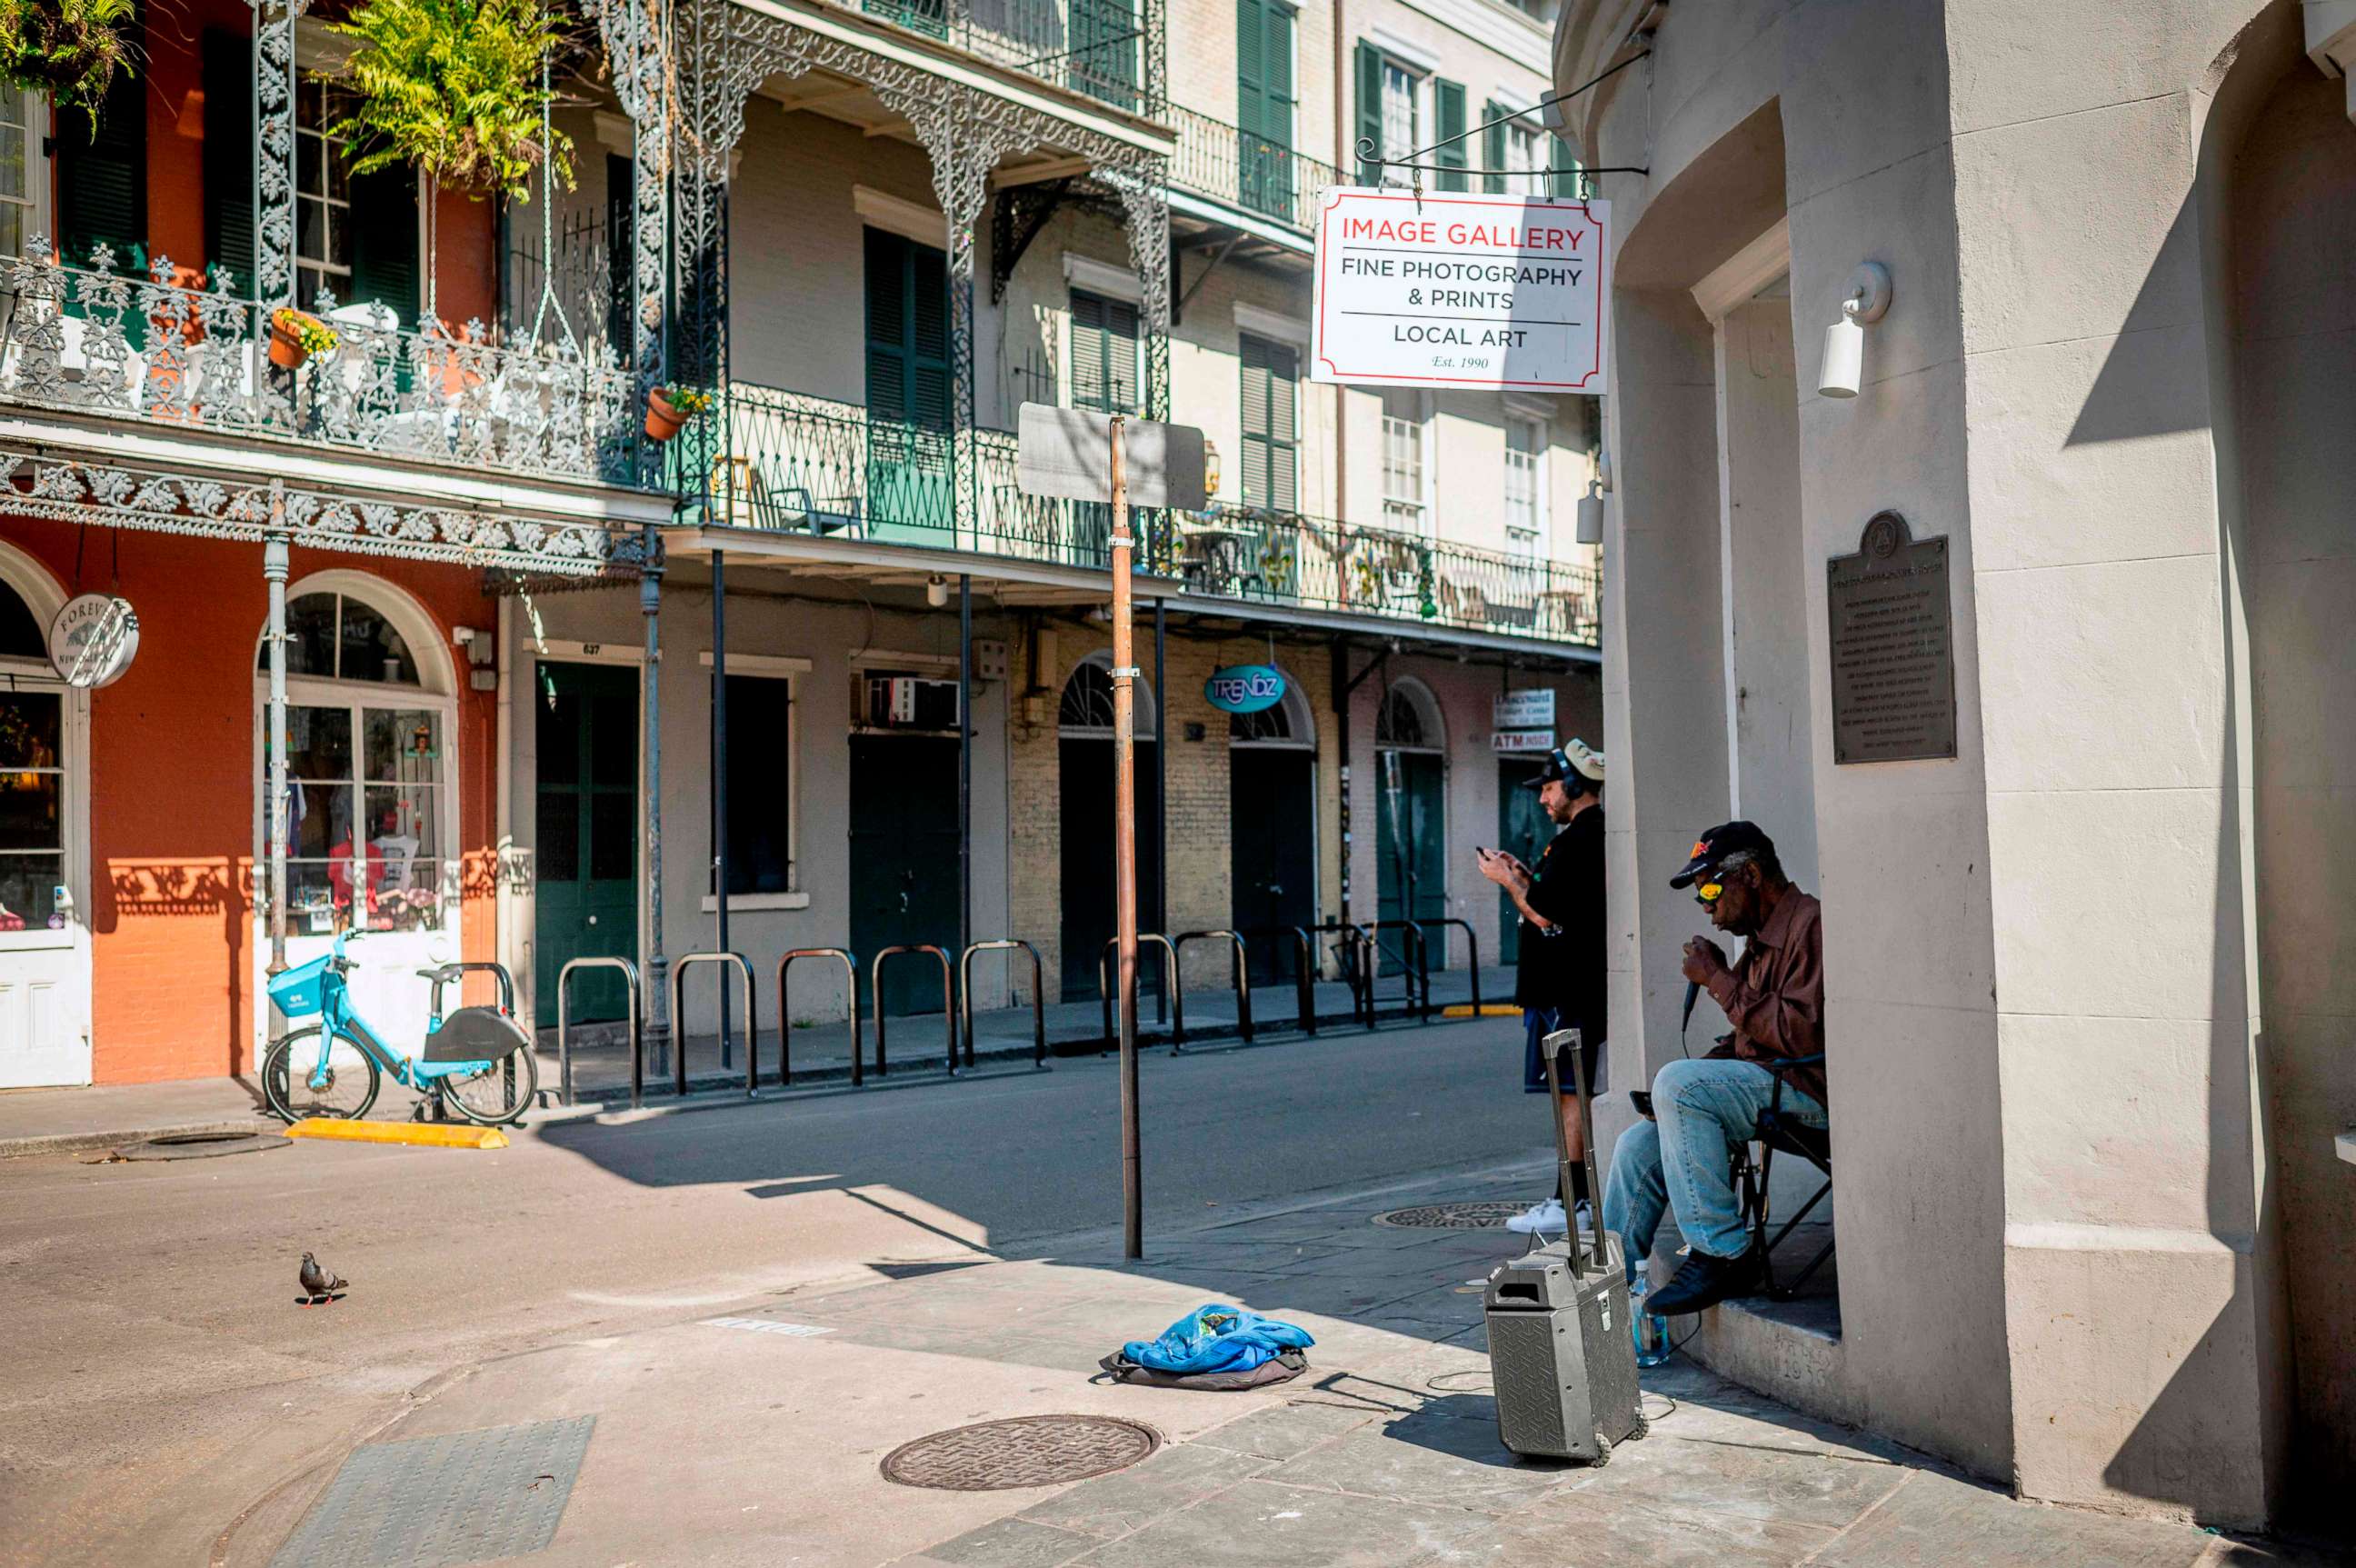 PHOTO: A man sings on a corner of the French Quarter in New Orleans, on March 26, 2020.